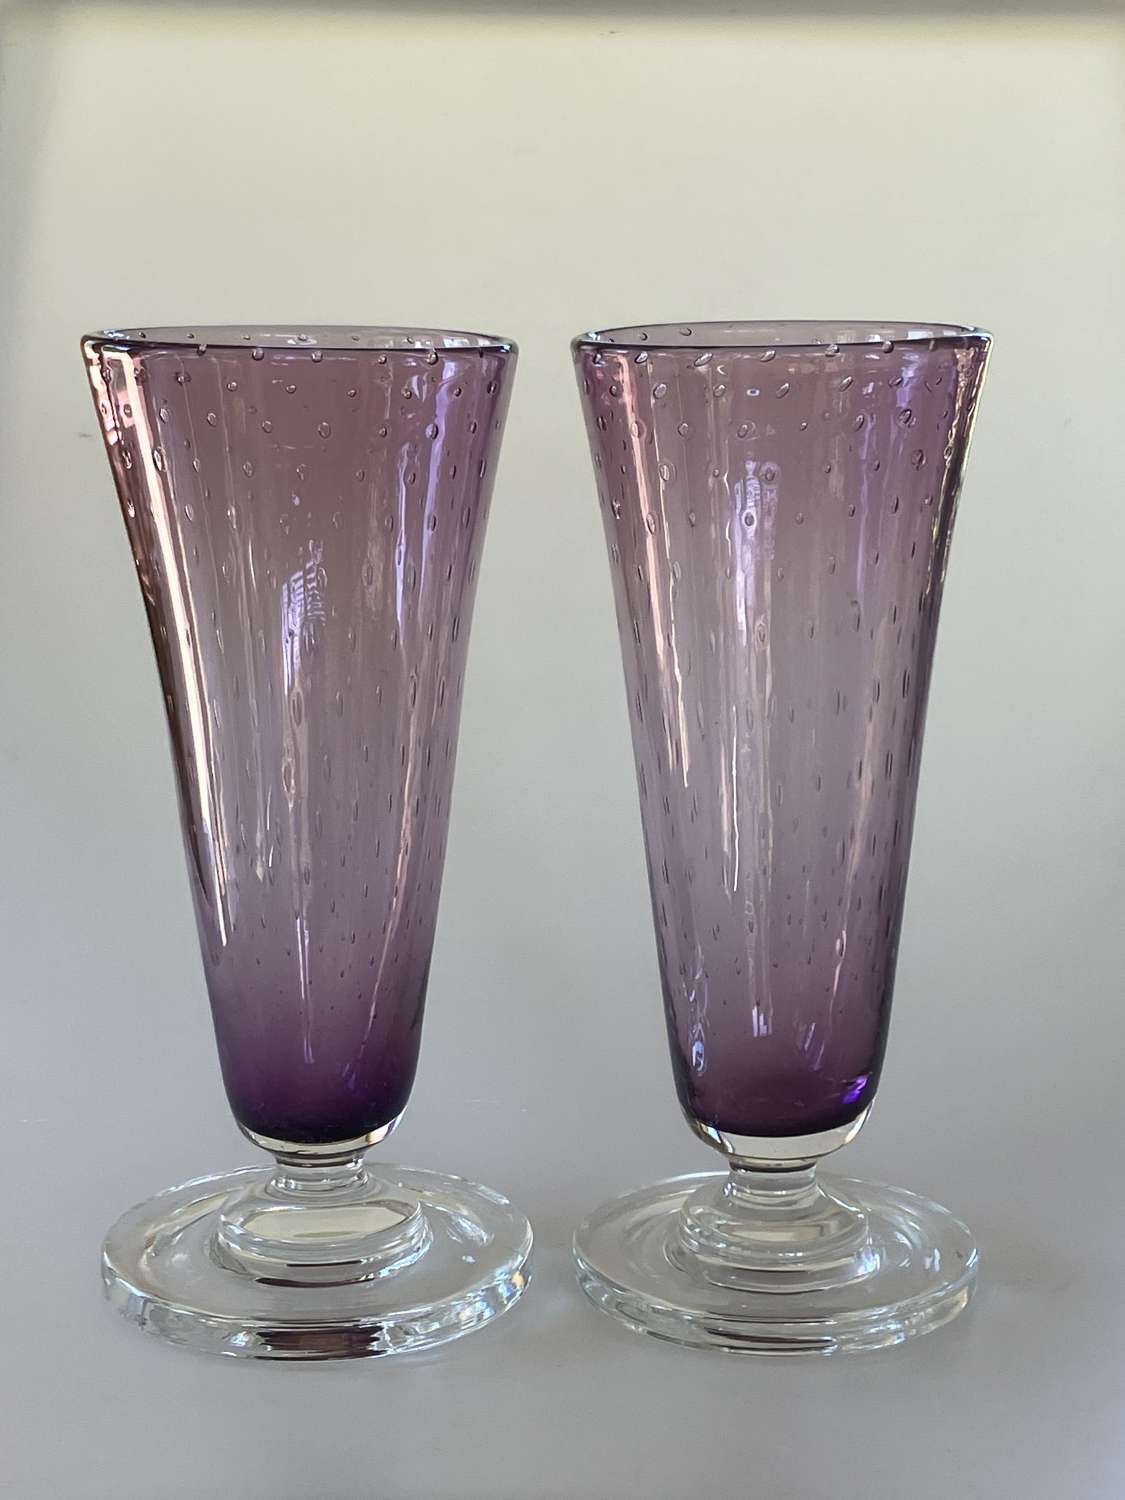 Pair of amethyst conicle vases, Keith Murray